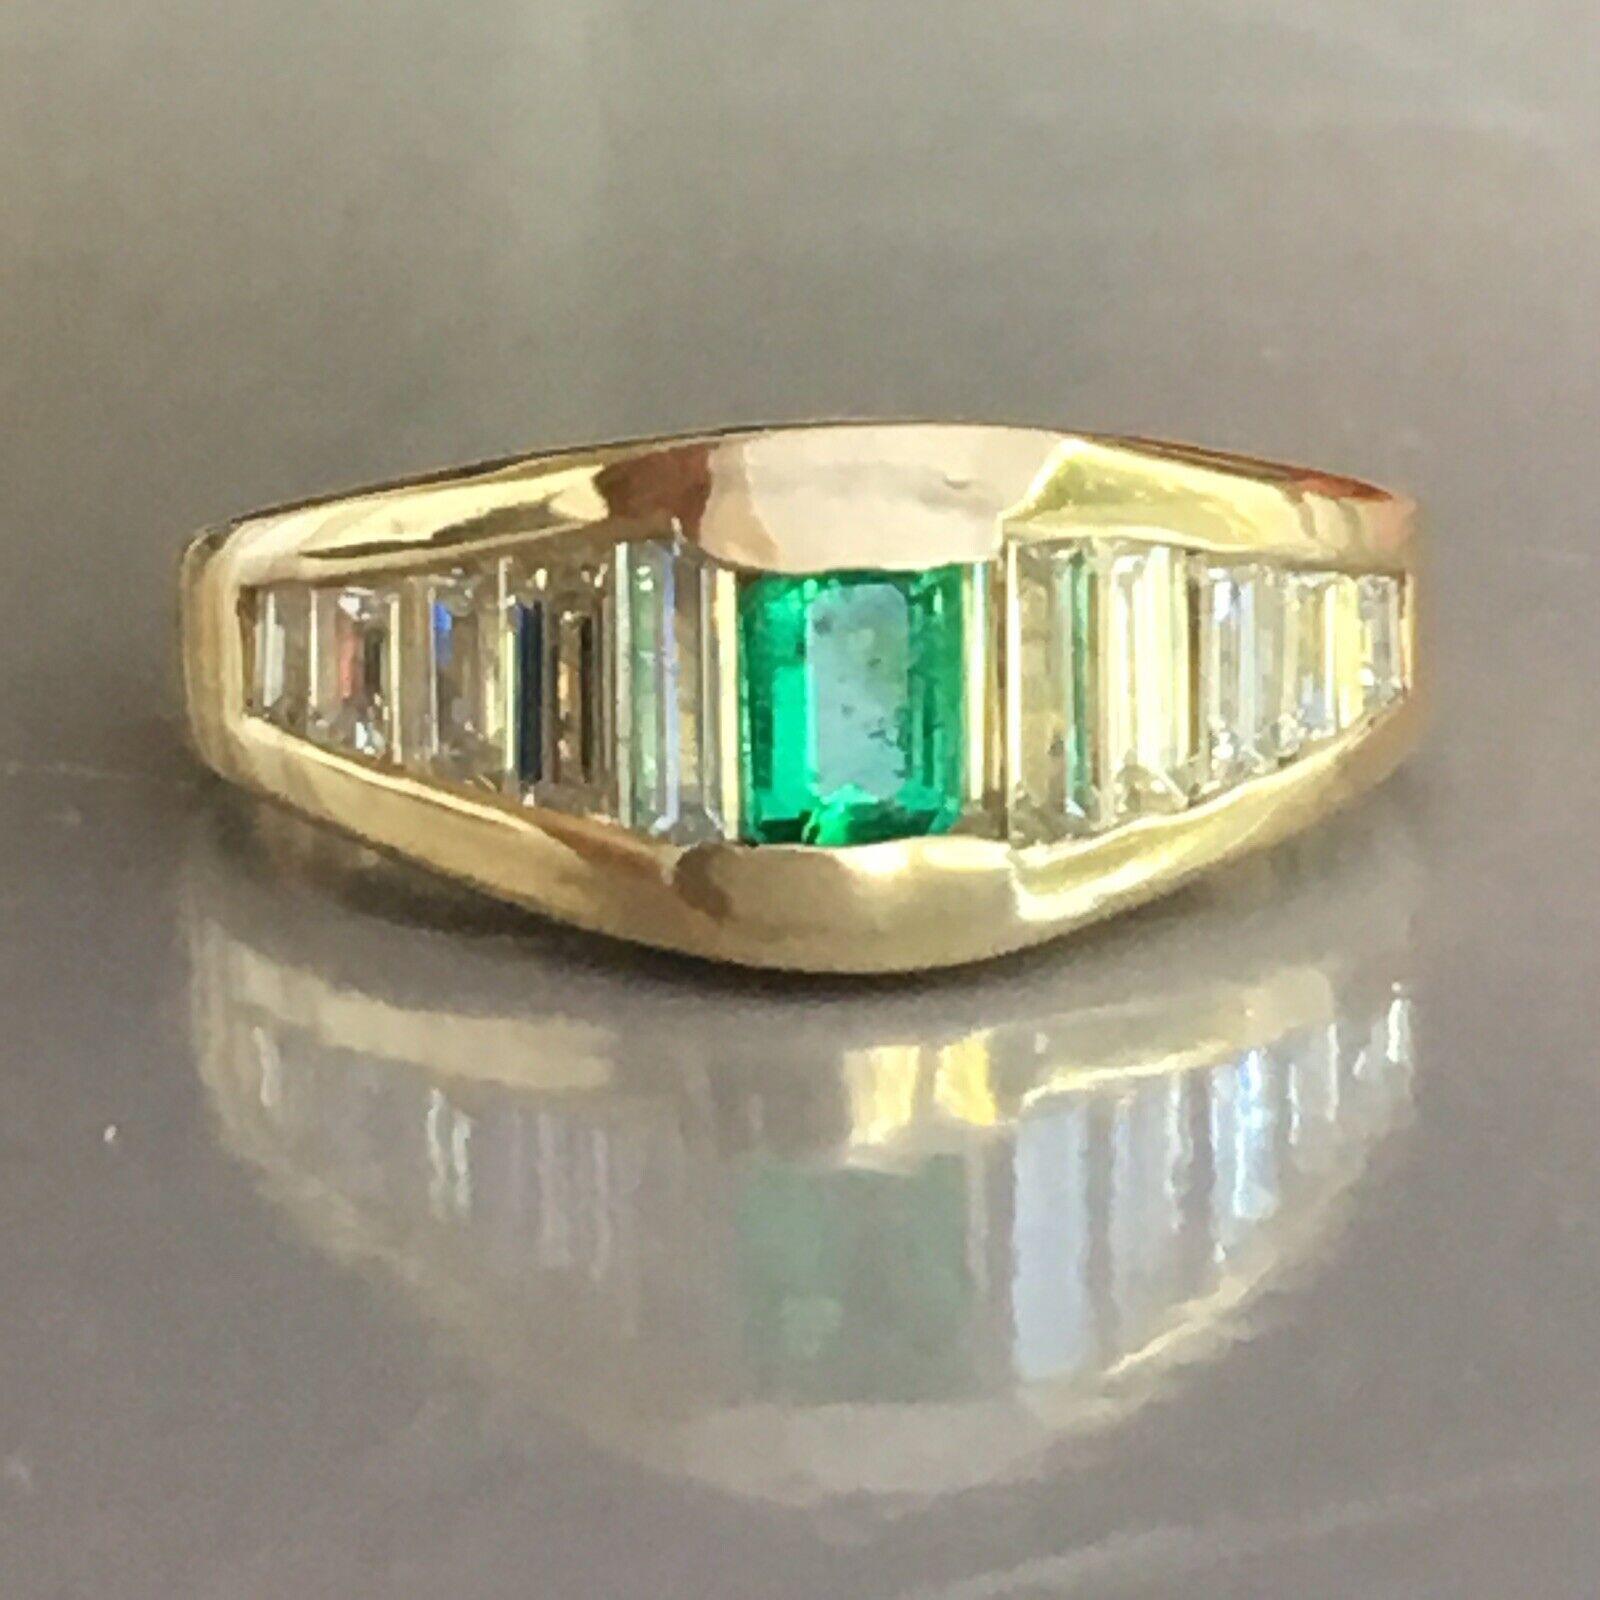 14K Yellow gold Lady's ring 
7.7 mm on top tapered down to 2.6 mm in bottom
One Emerald and Ten Baguette cut Diamonds

14K Yellow gold Lady's ring centered with a Natural earth mined Emerald, no enhancements, measuring 3.2 mm 4.0 mm 2.2 mm